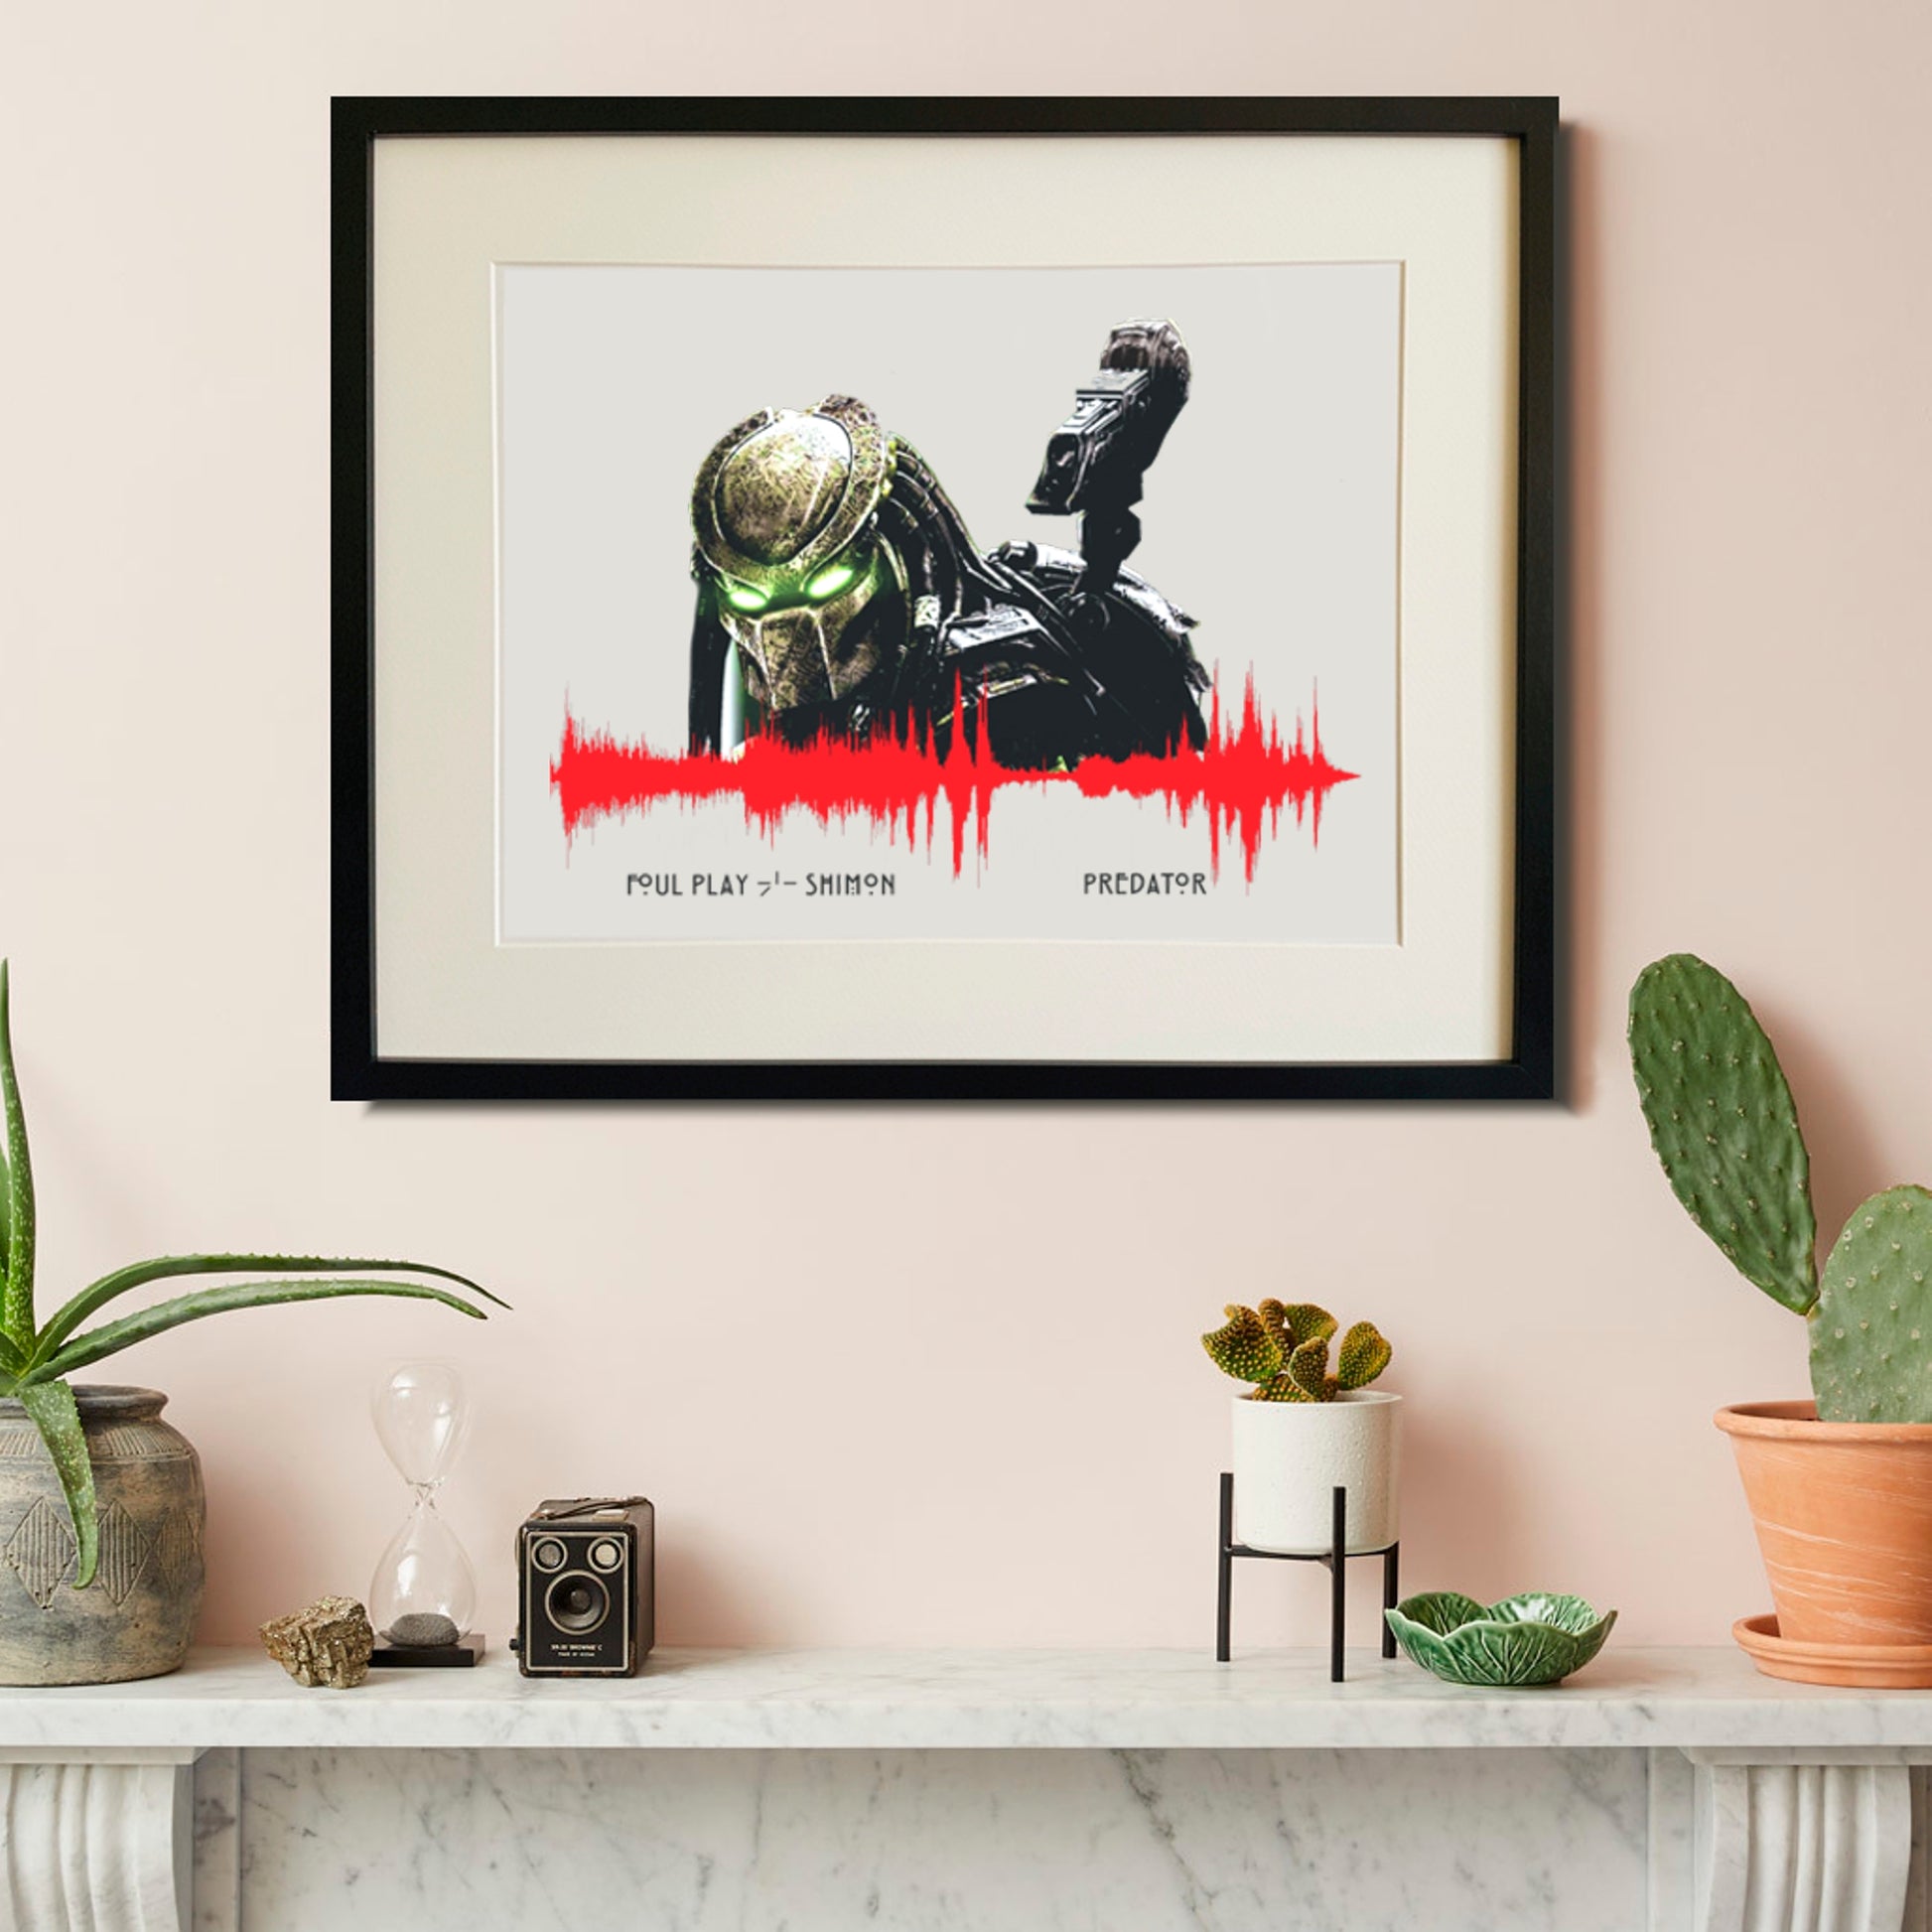 Personalised movie poster with playable soundwave samples